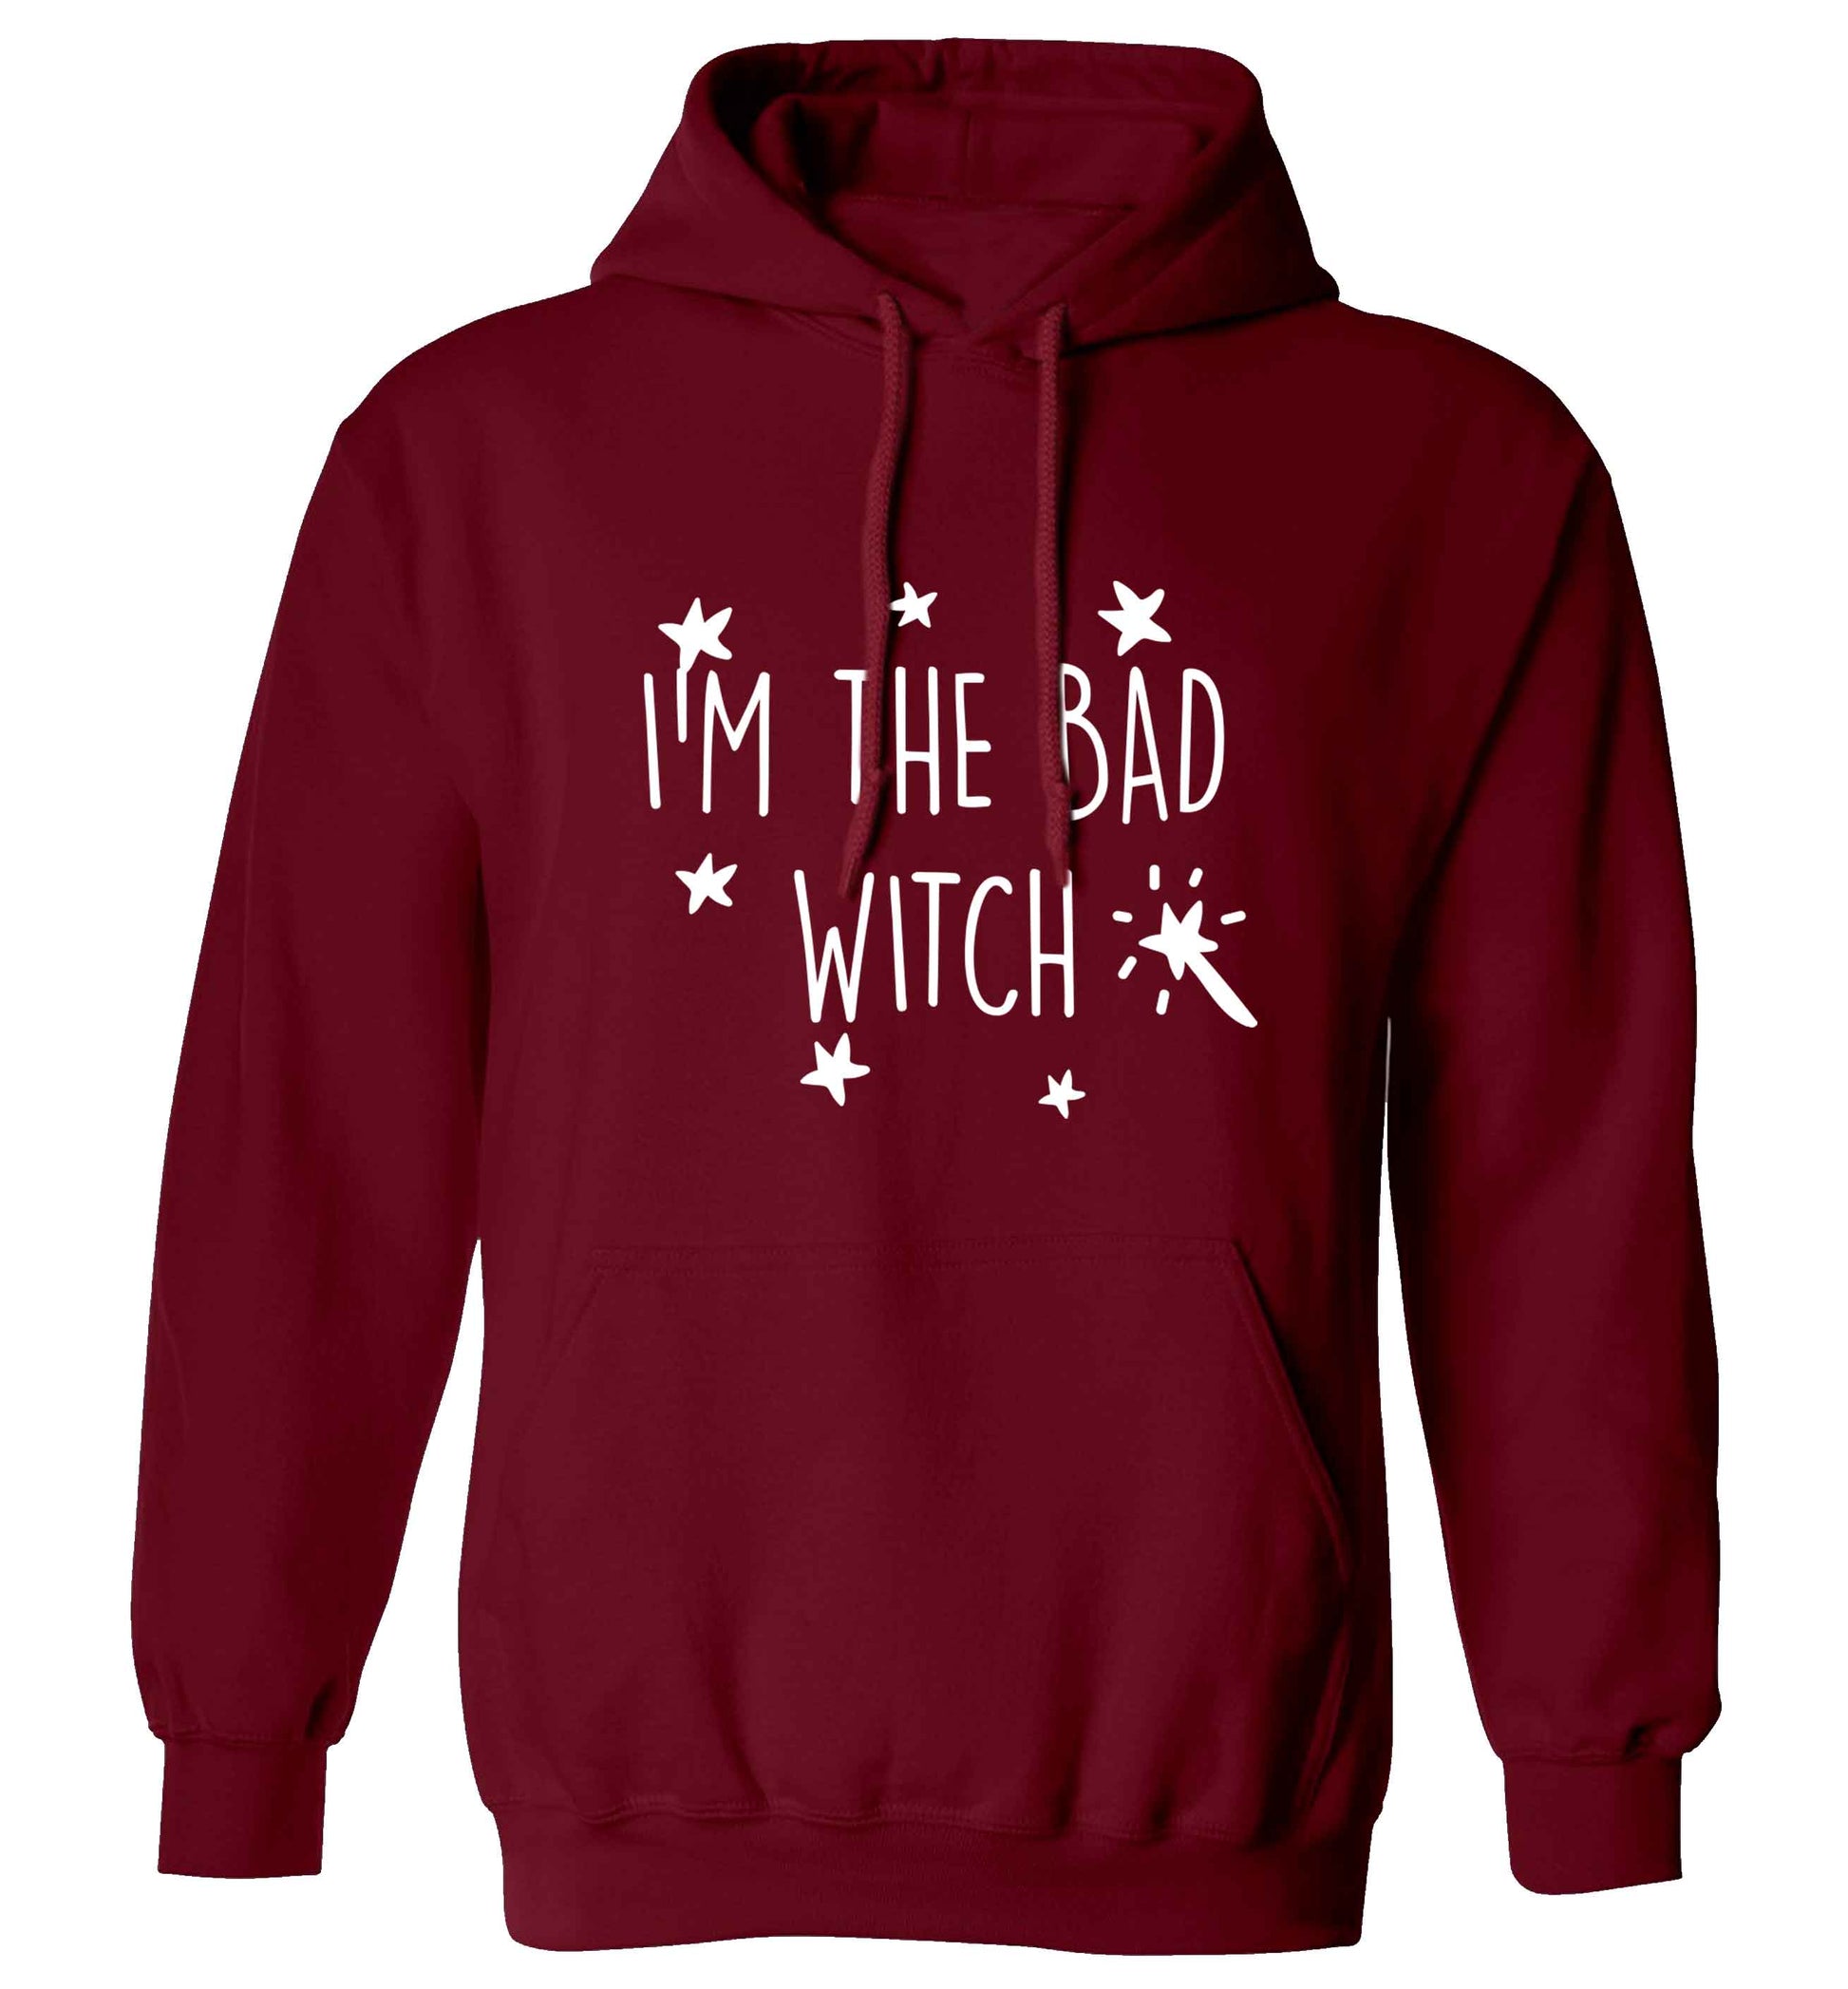 Bad witch adults unisex maroon hoodie 2XL